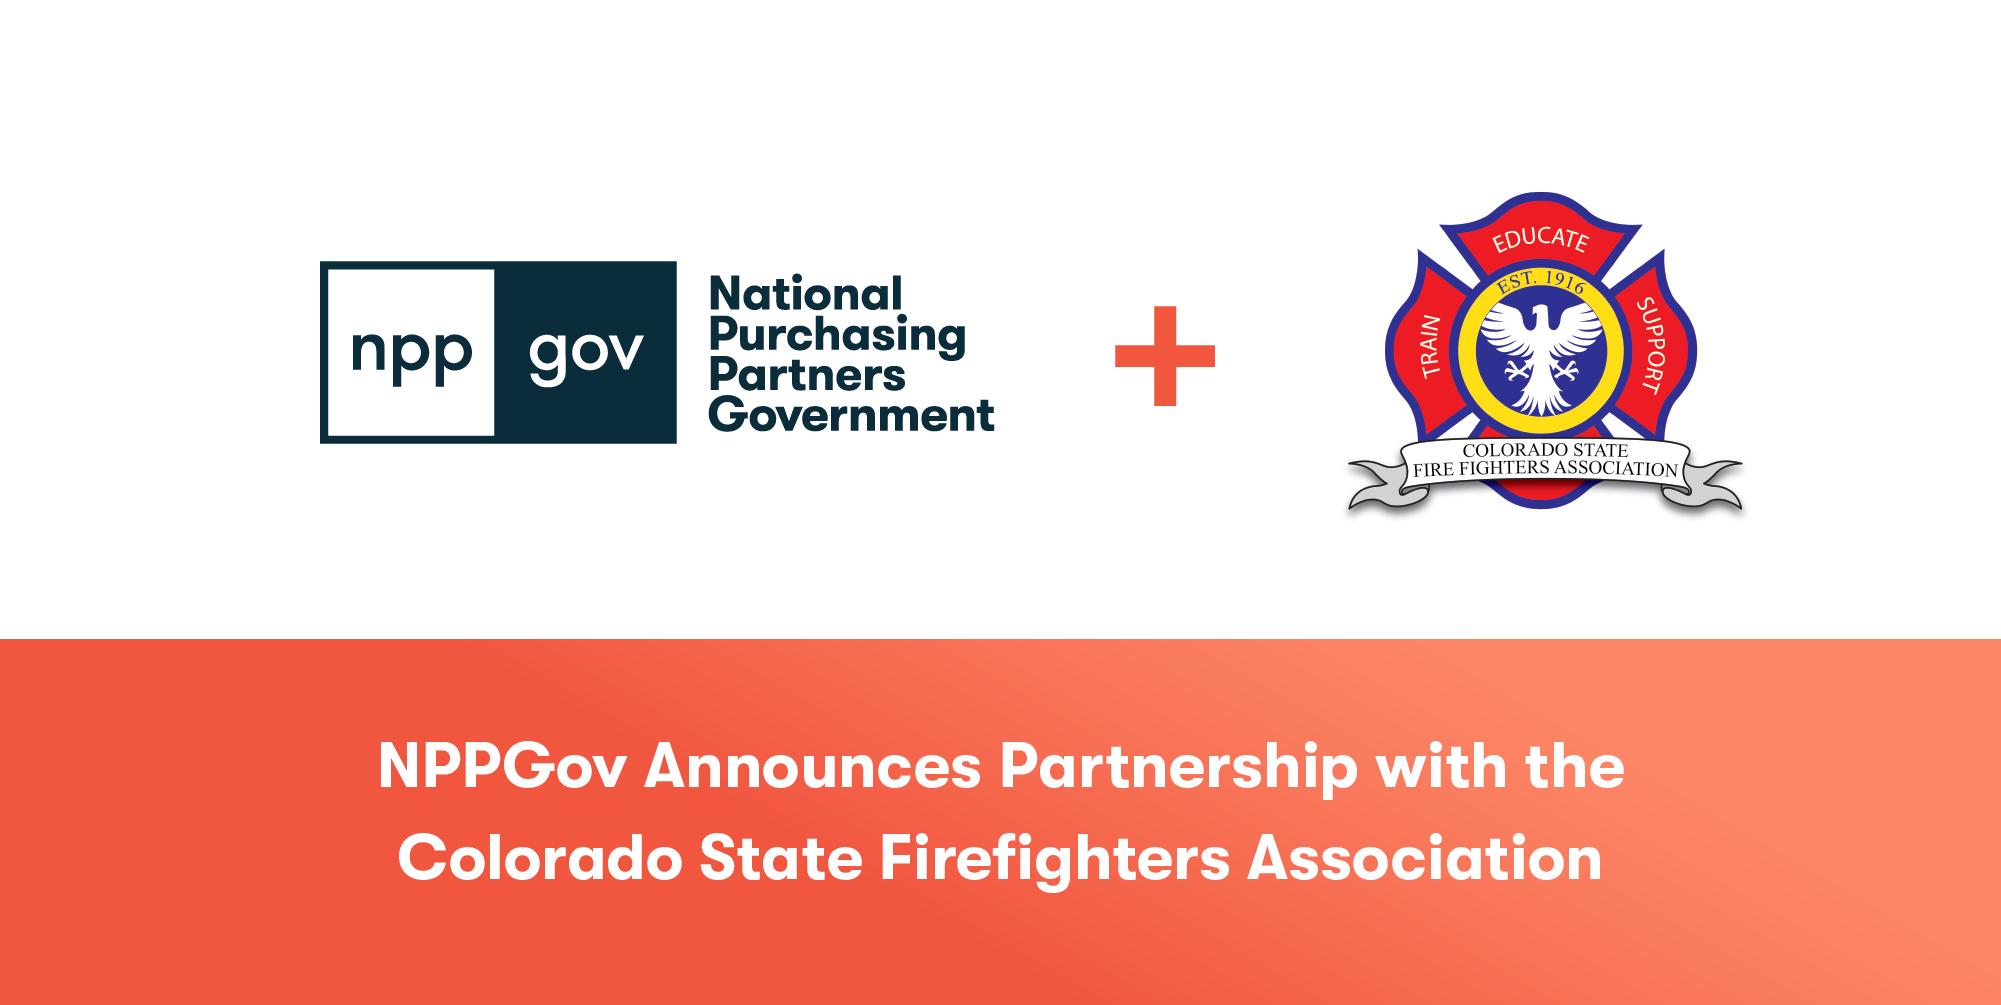 Colorado State Firefighters Association Partners With Public Safety GPO to Provide Cooperative Agreements to Their Members